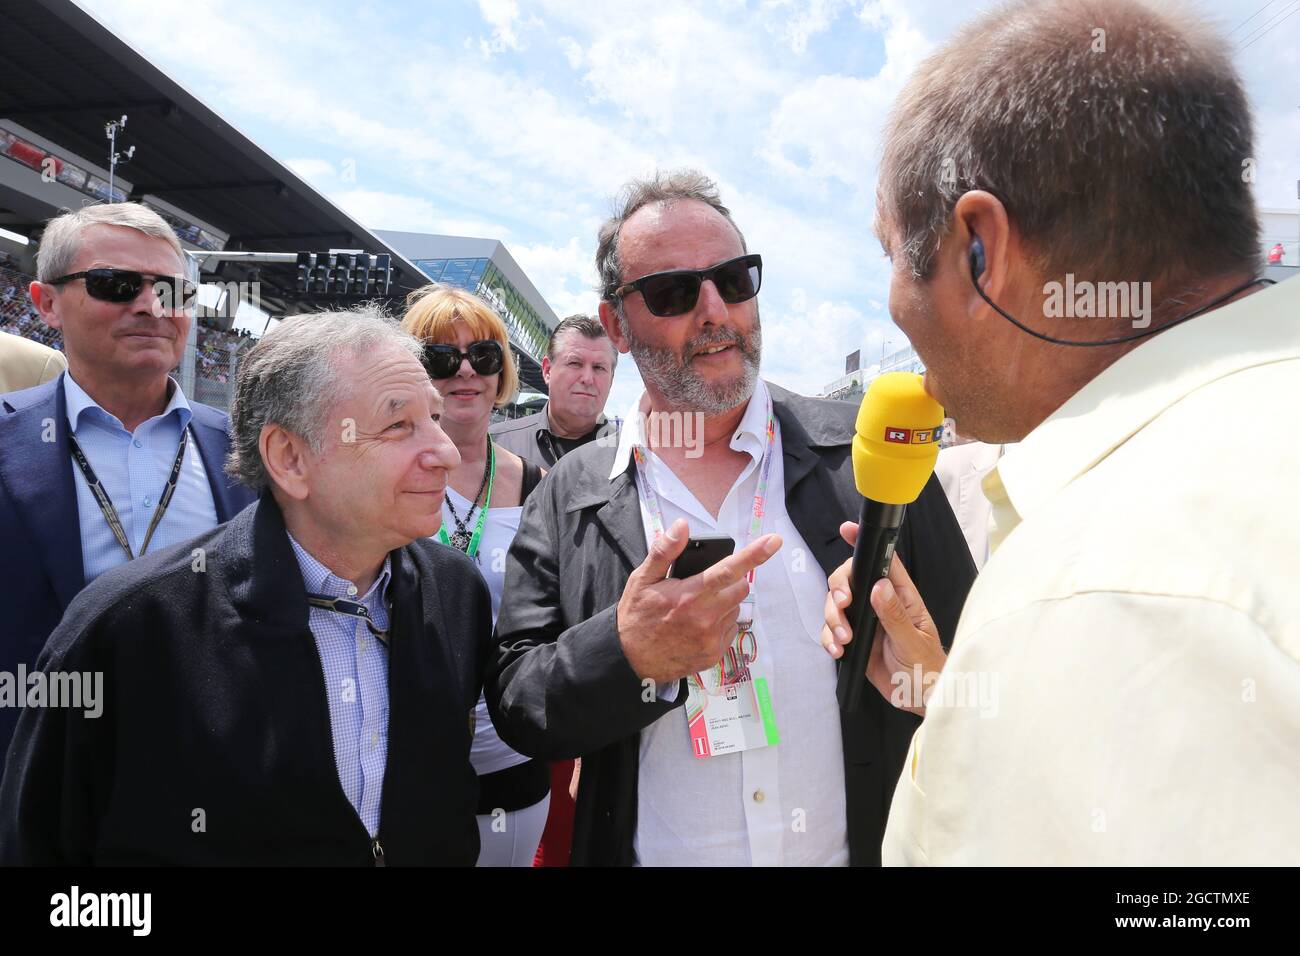 (L to R): Jean Todt (FRA) FIA President on the grid with Jean Reno (FRA) Actor and Kai Ebel (GER) RTL TV Presenter. Austrian Grand Prix, Sunday 22nd June 2014. Spielberg, Austria. Stock Photo